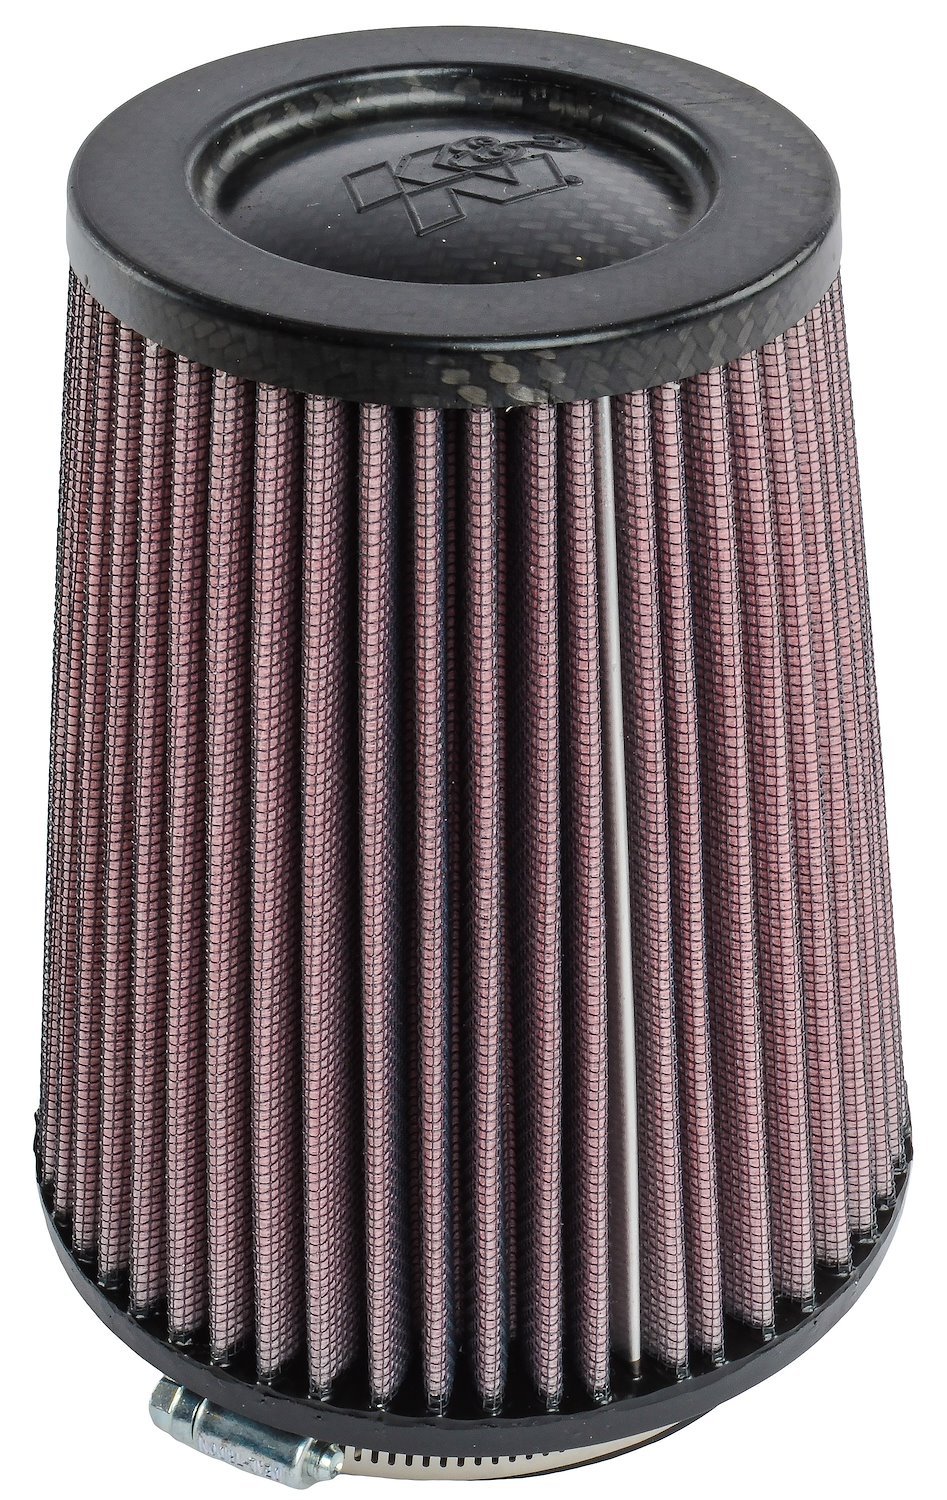 Tapered Filter Flange Dia.- F: 4" , 102 mm